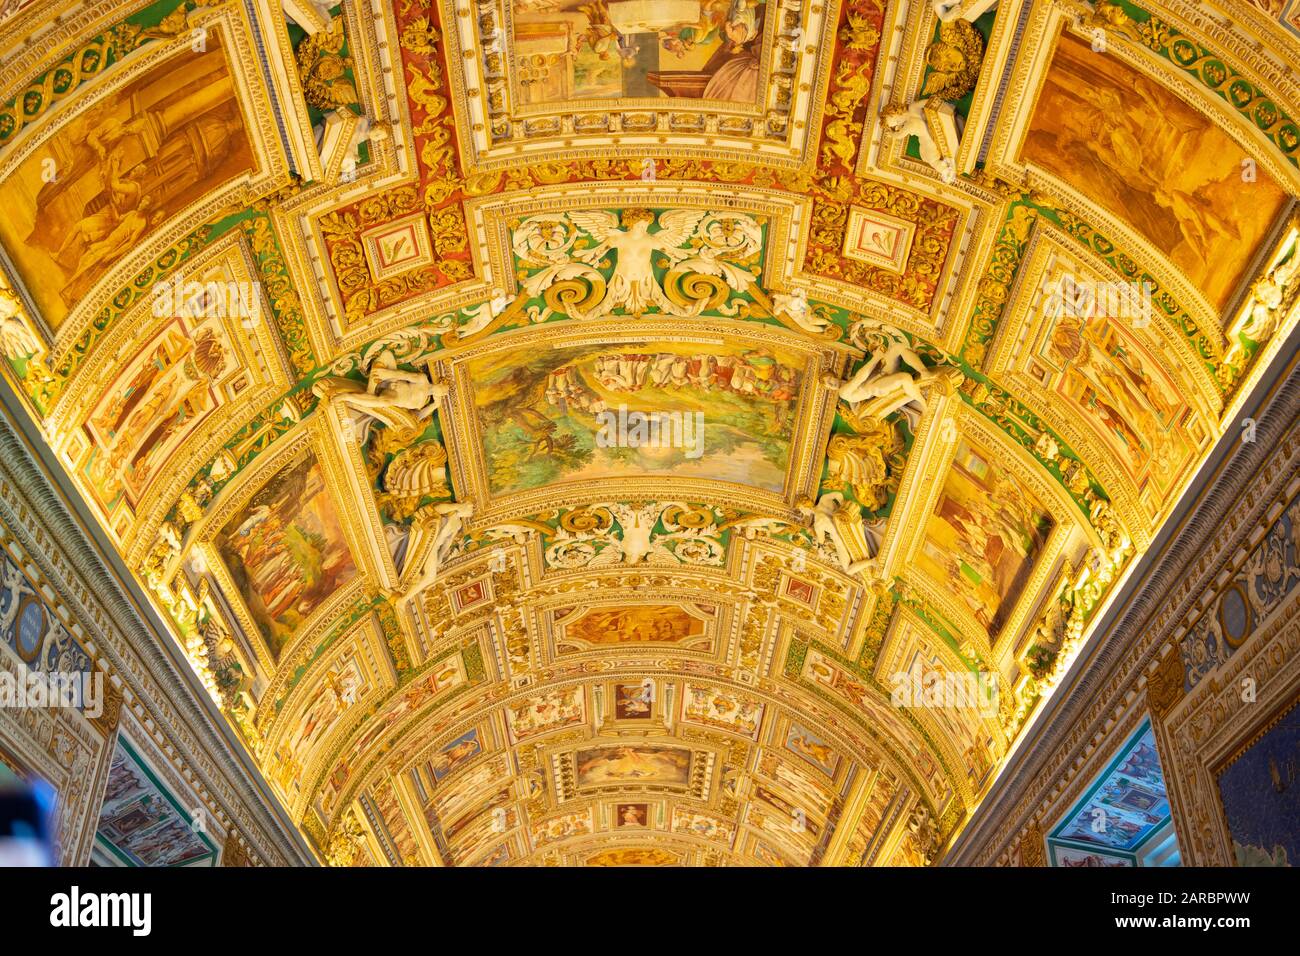 Rome, Italy - Jan 3, 2020:  Wall and ceiling paintings in the Gallery of Maps  at the Vatican Museum, Vatican City, Rome. Stock Photo